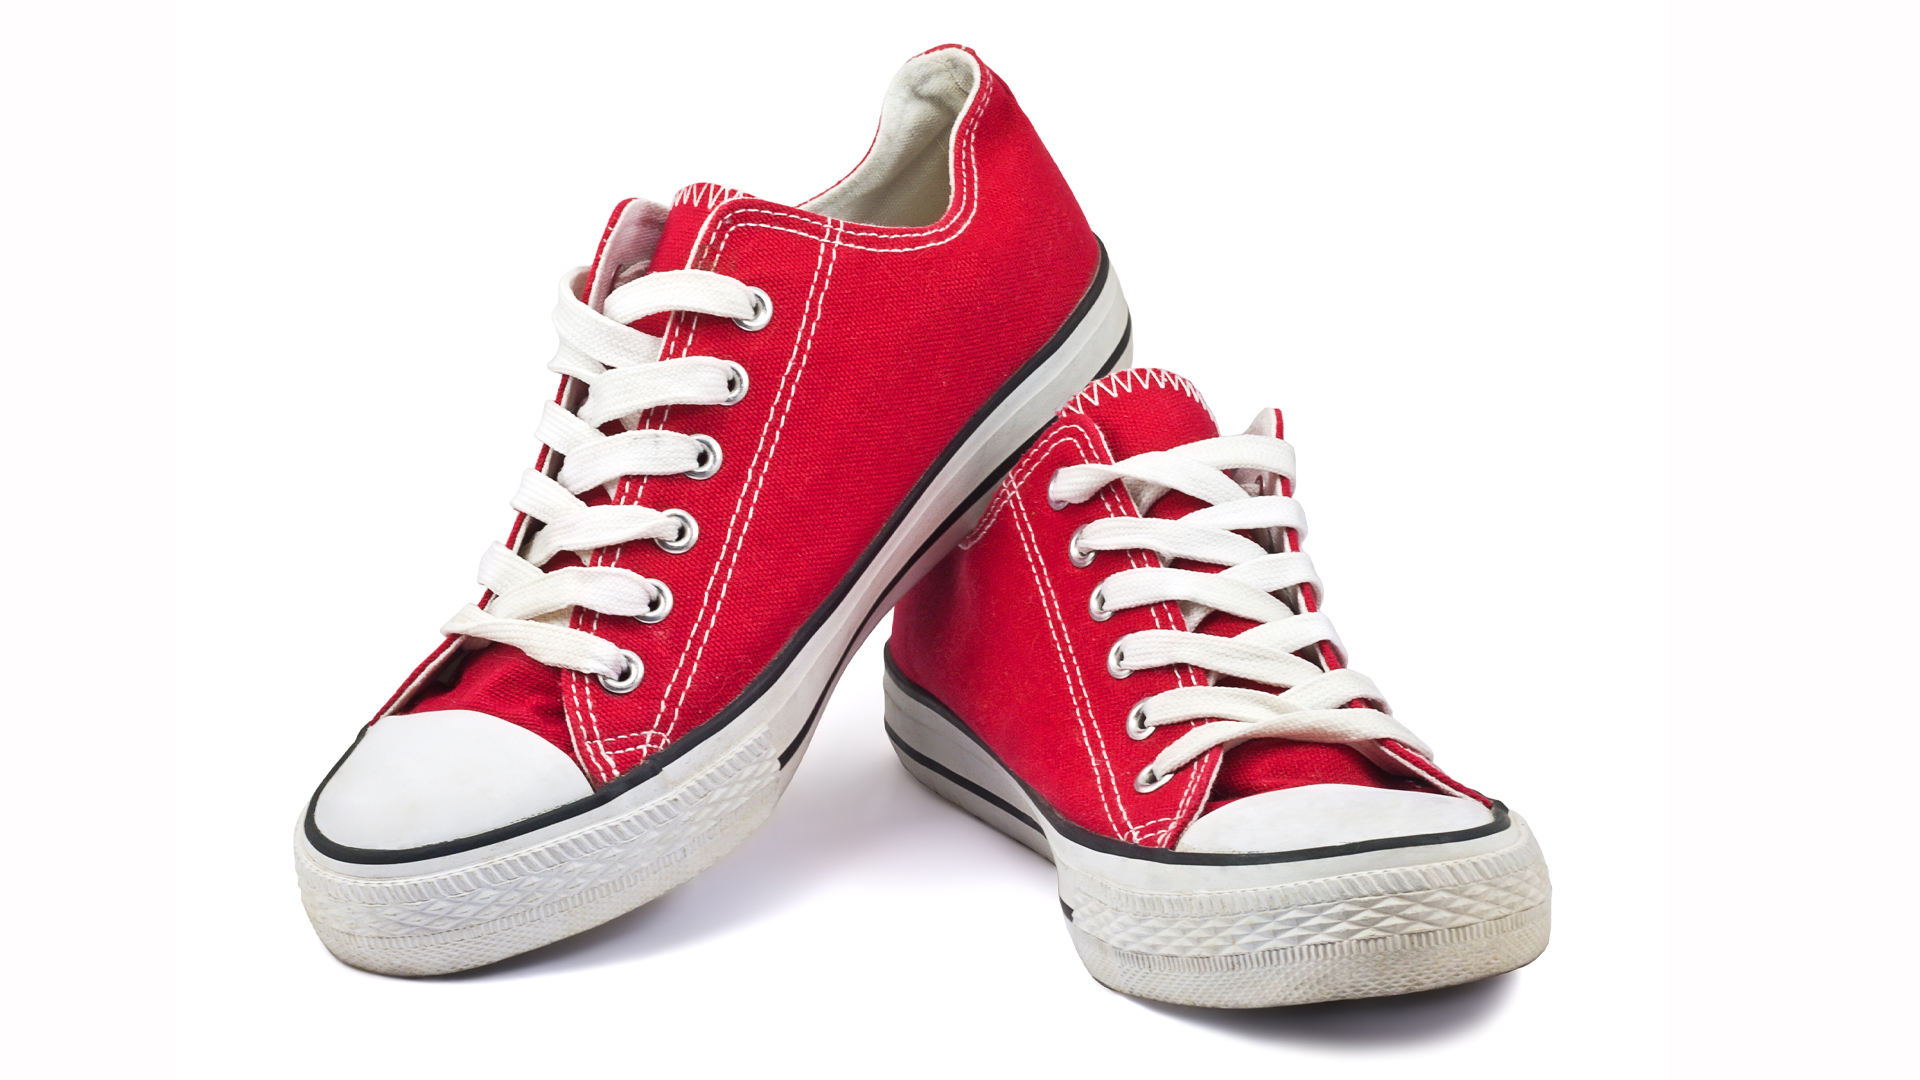 A pair of red Converse style trainers